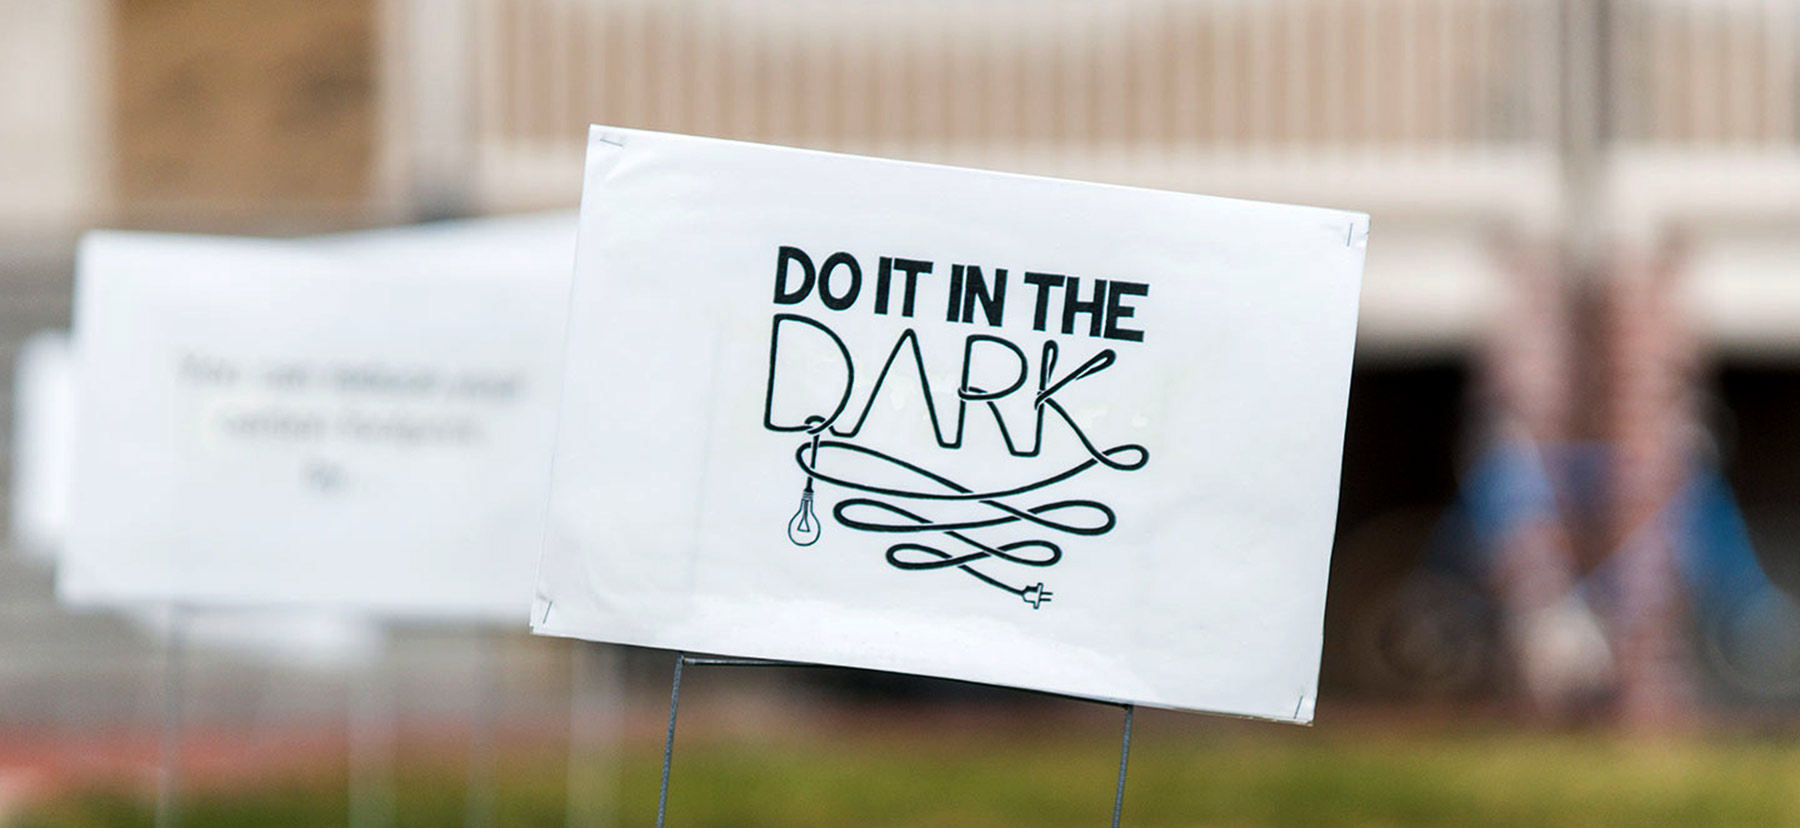 A Do it in the Dark sign